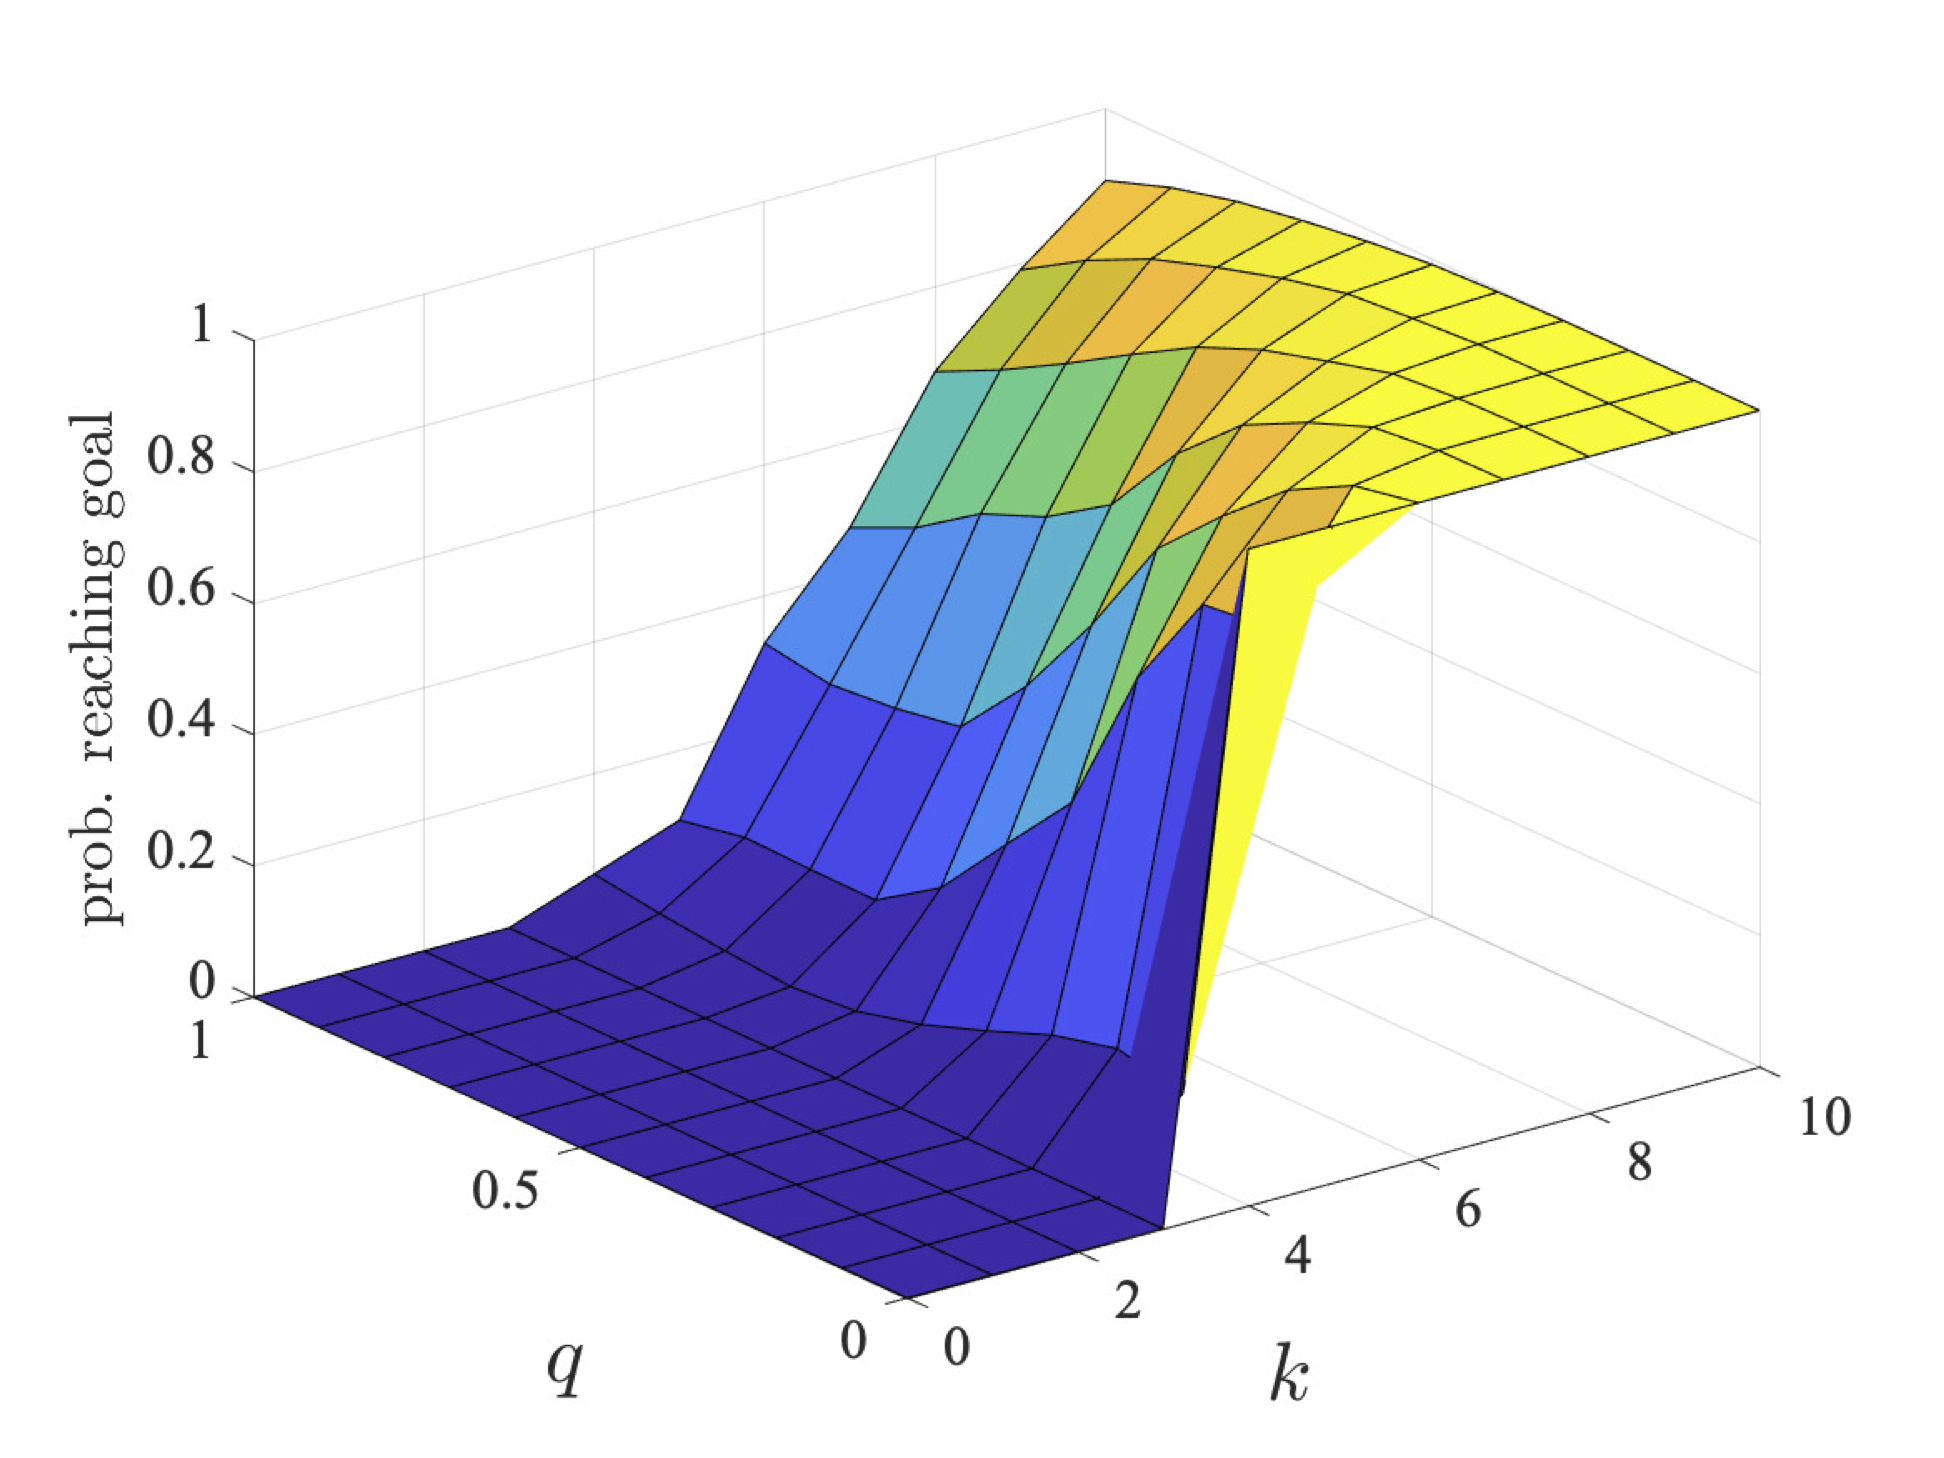 plot: maximum probability robot 1 can ensure they reach their goal within a deadline (l=5)